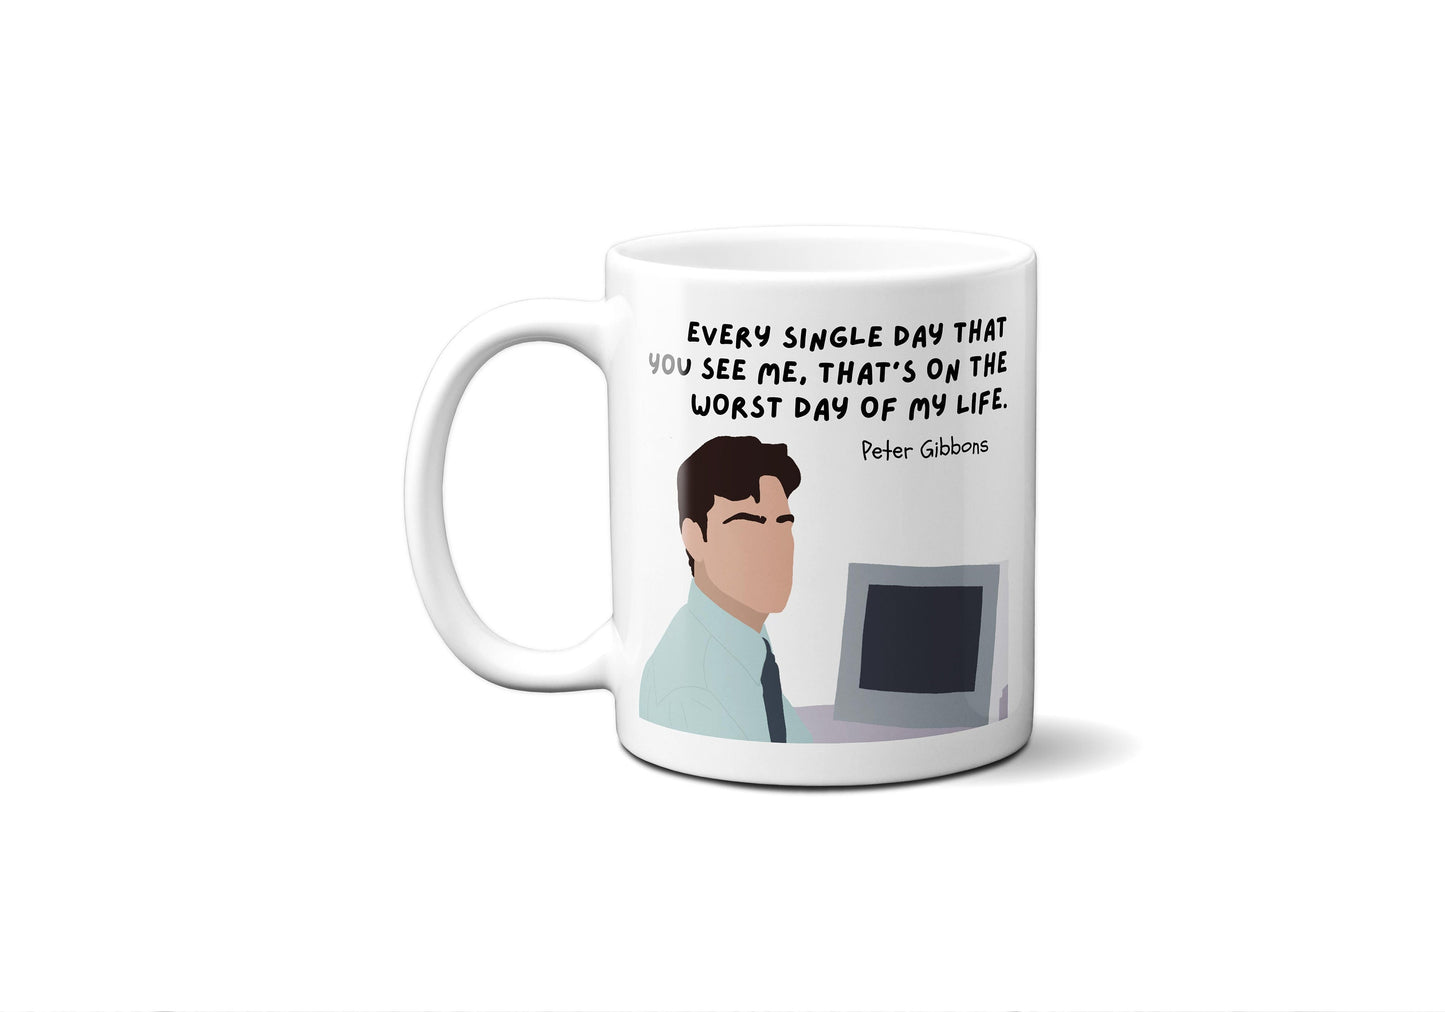 Every single day that you see me that's on the worst day of my life | Peter Gibbons Quote Mug | Office Space Mug